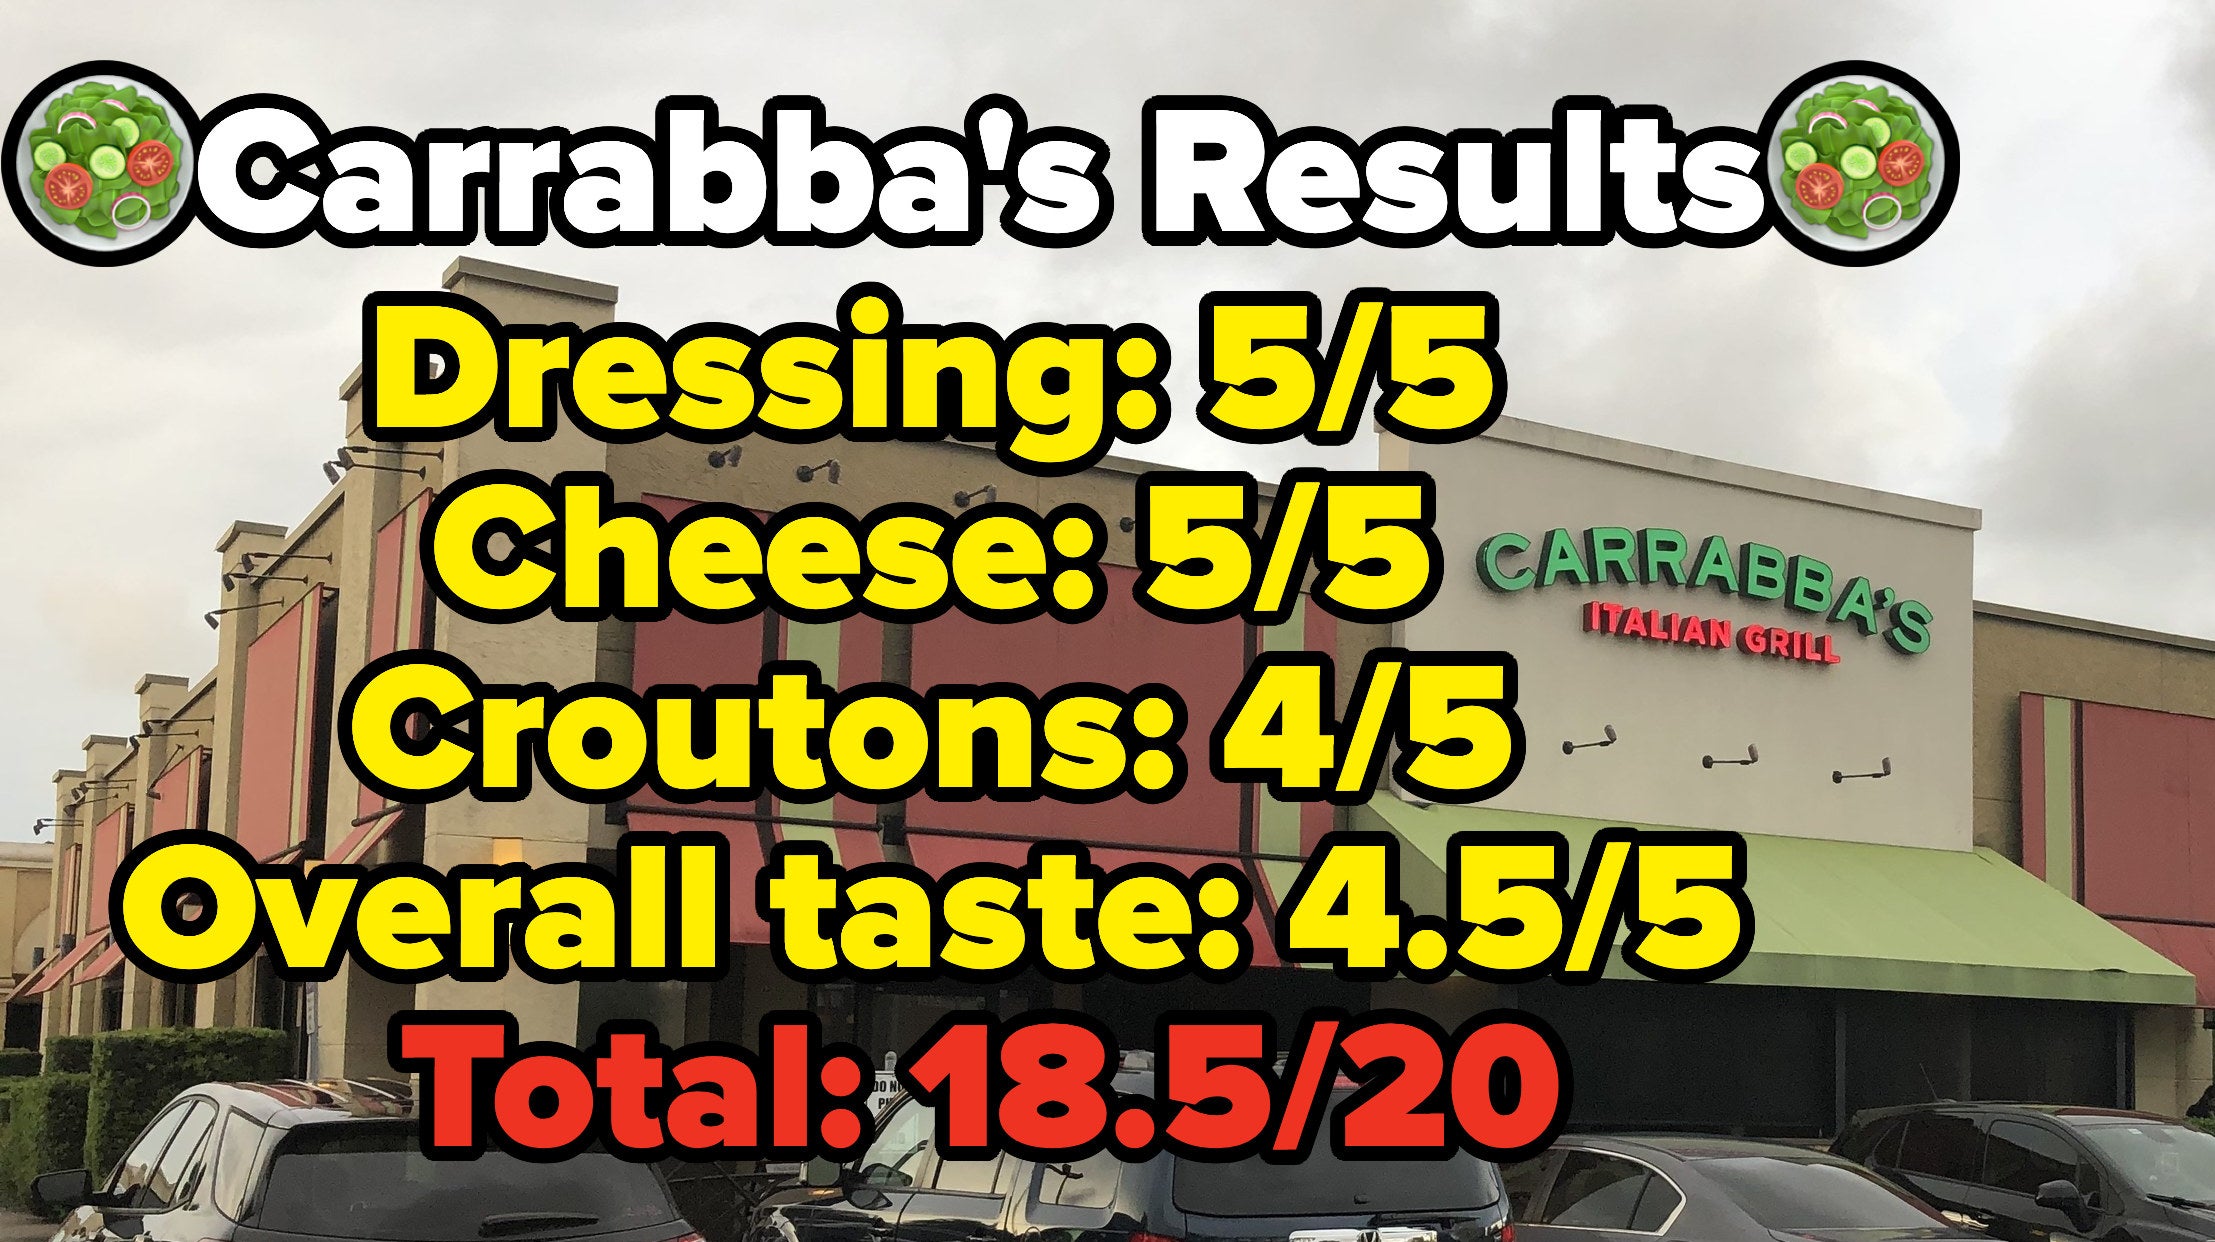 Photo of Carrabba&#x27;s with text that says &quot;Carrabba&#x27;s Results: dressing 5/5, cheese 5/5, croutons 4/5, overall taste 4.5/5, total 18.5/20&quot;